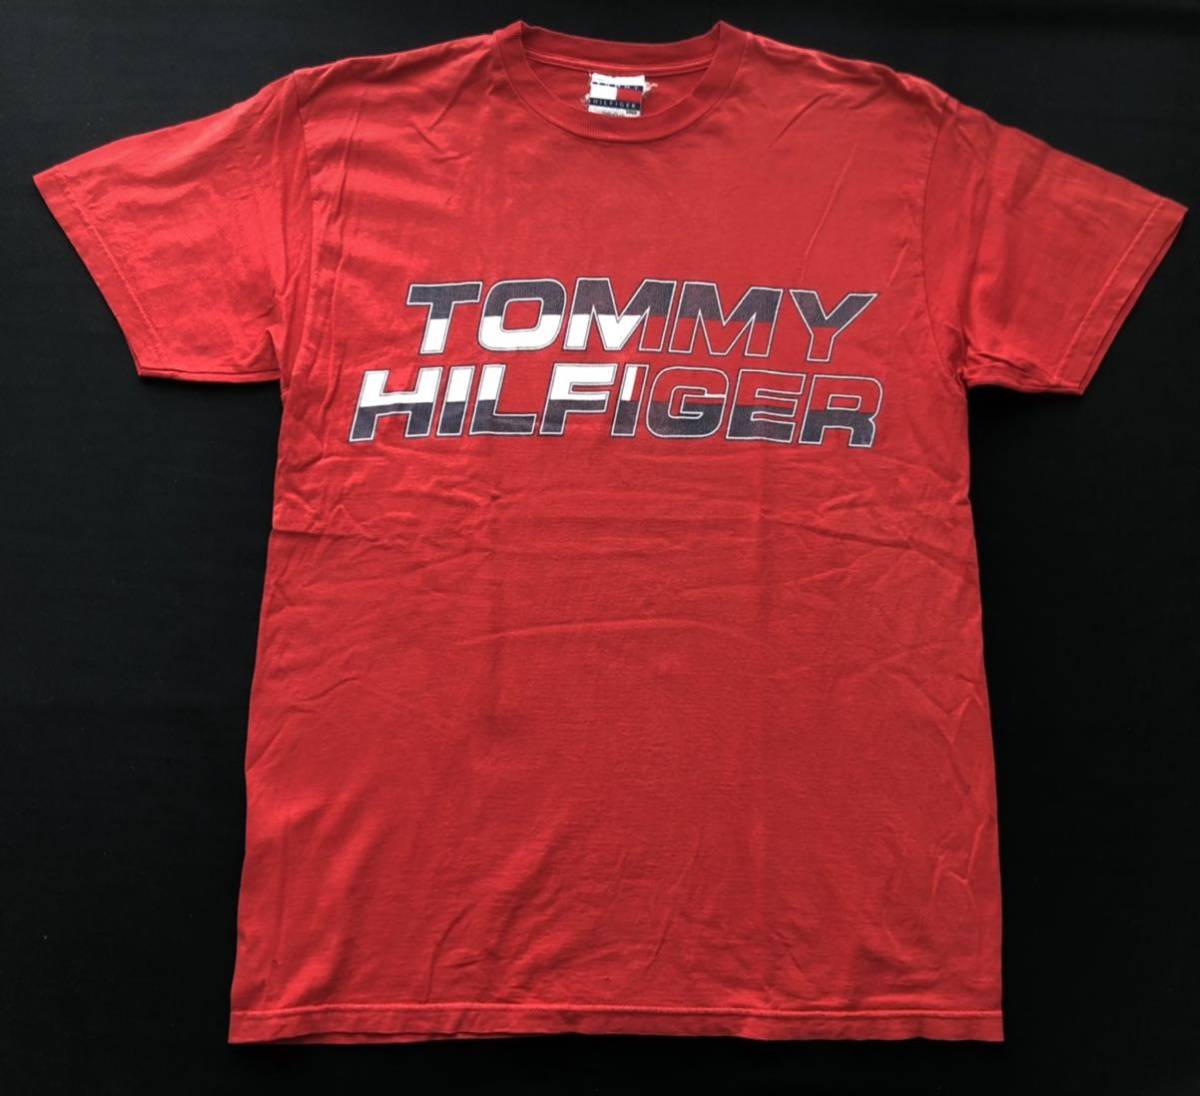 USA製 90s トミーヒルフィガー ビッグロゴ デカロゴ Tシャツ　　MADE IN USA アメリカ製 TOMMY HILFIGER 90年代 ヴィンテージ 柳5448_画像1